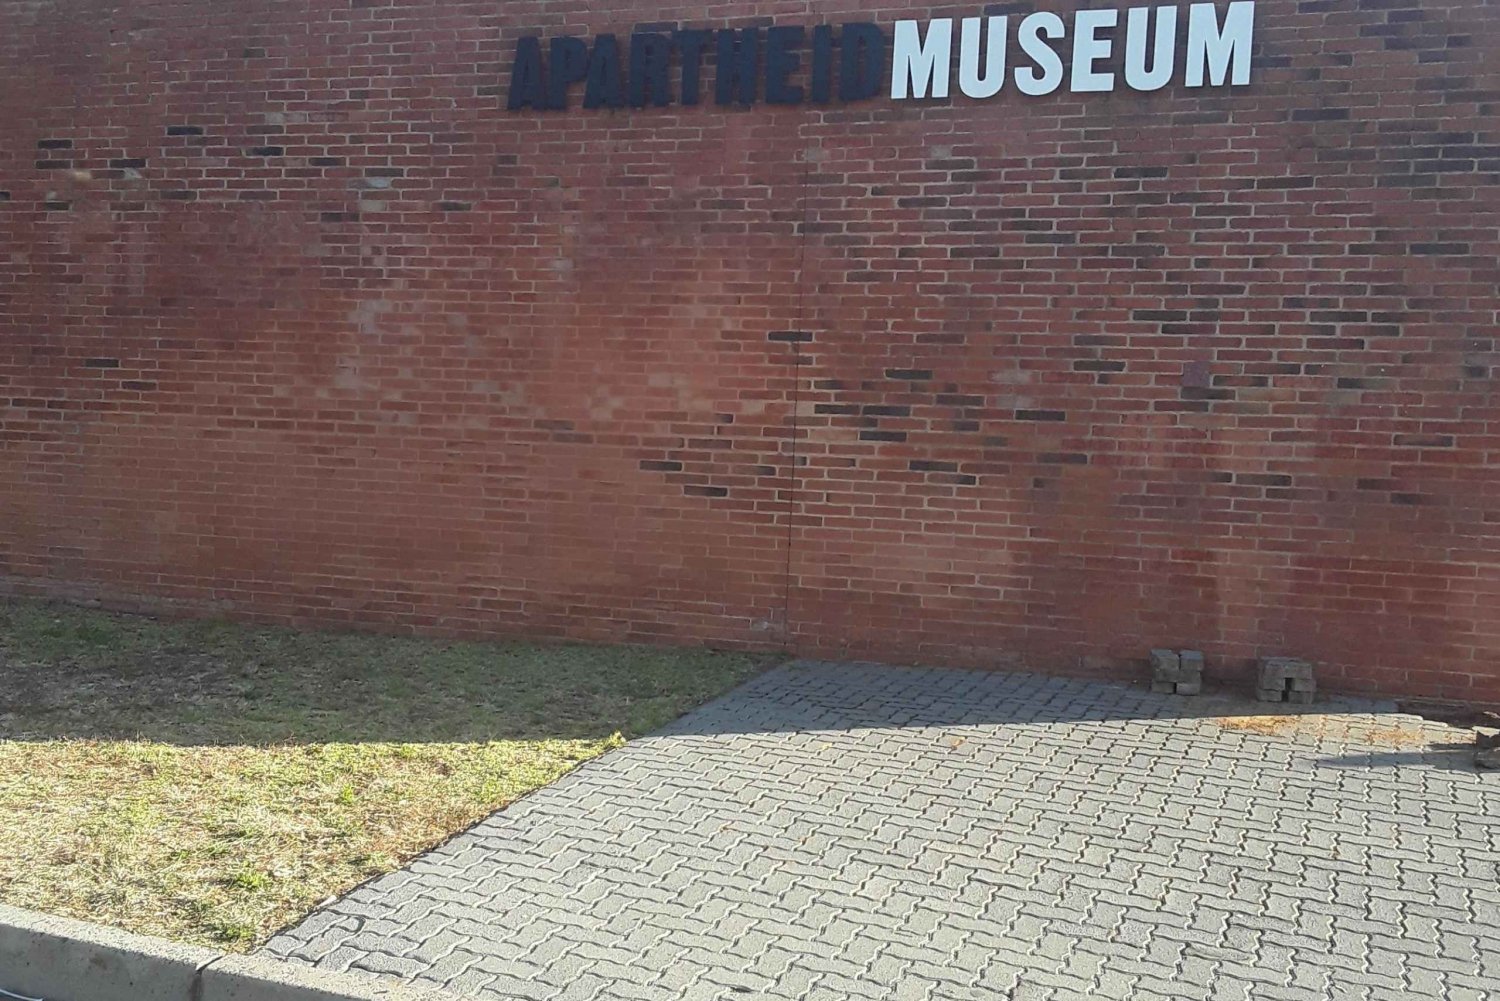 The Apartheid museum and Soweto 5 hours guided tour.